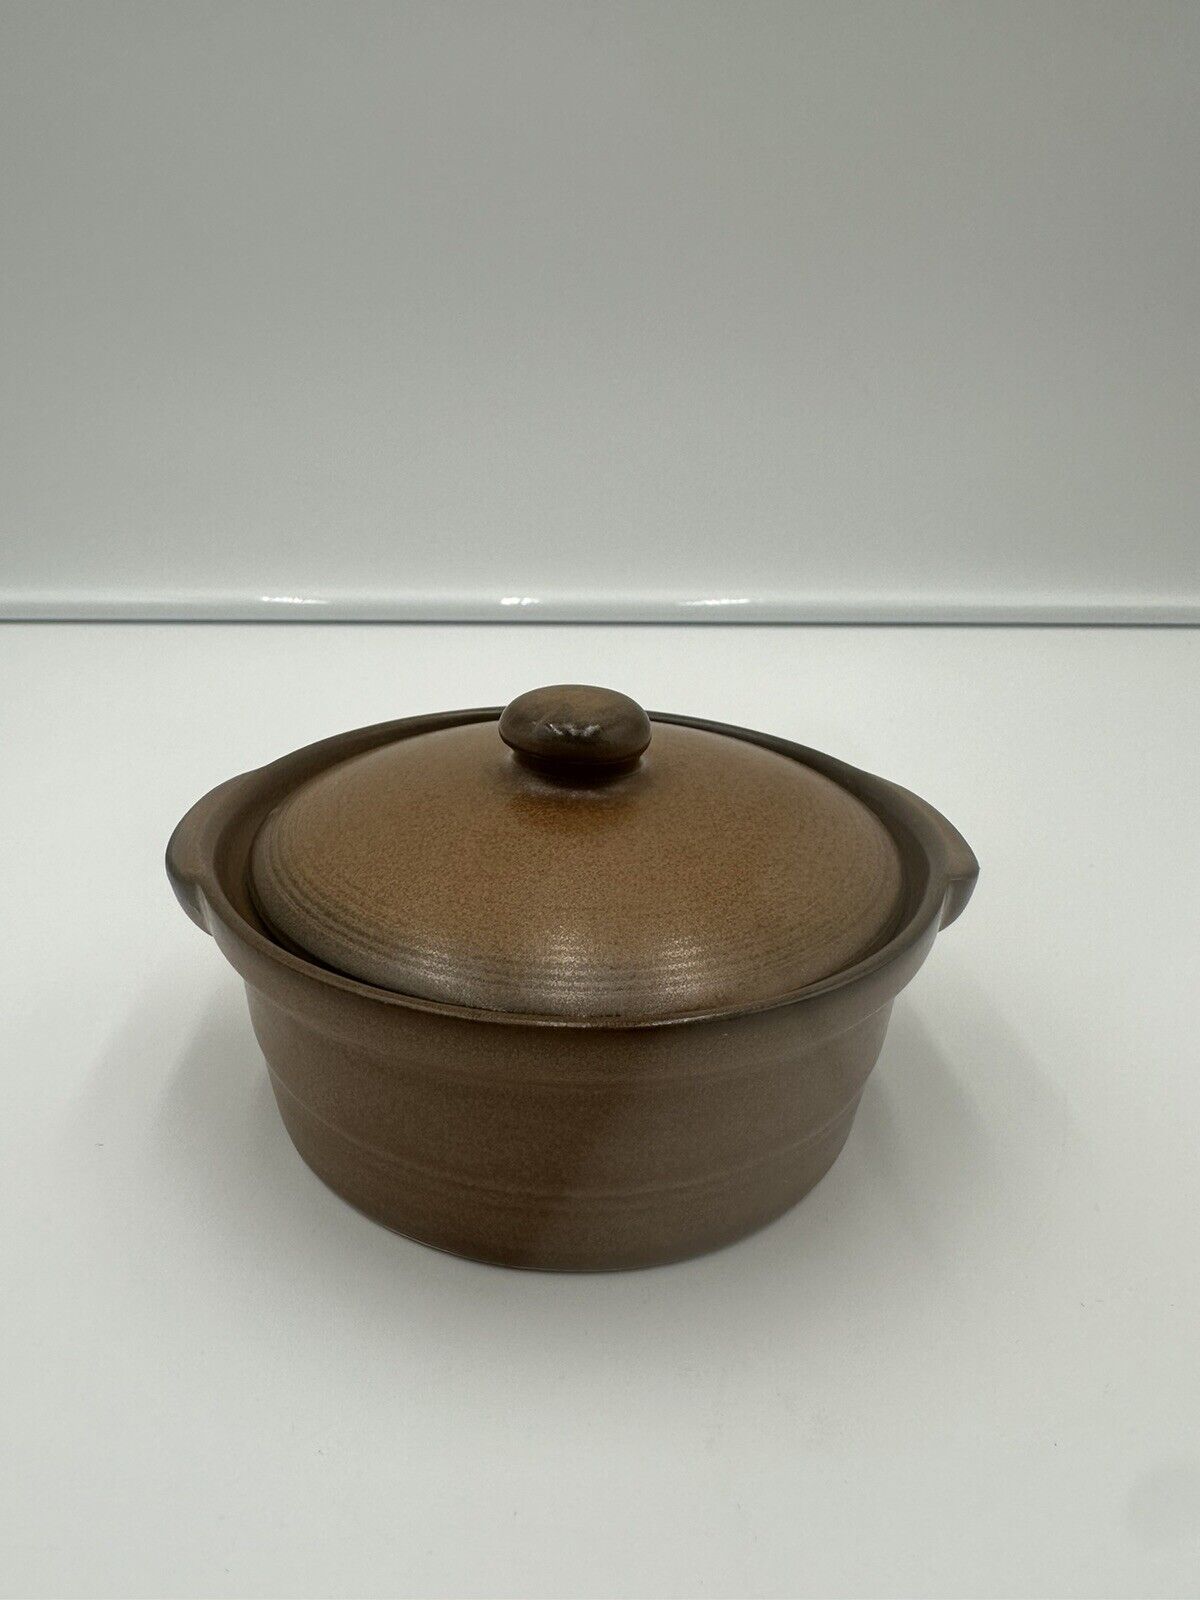 Norleans Small Brown Sugar Bowl Made In Korea Height 2.25” Width 5”